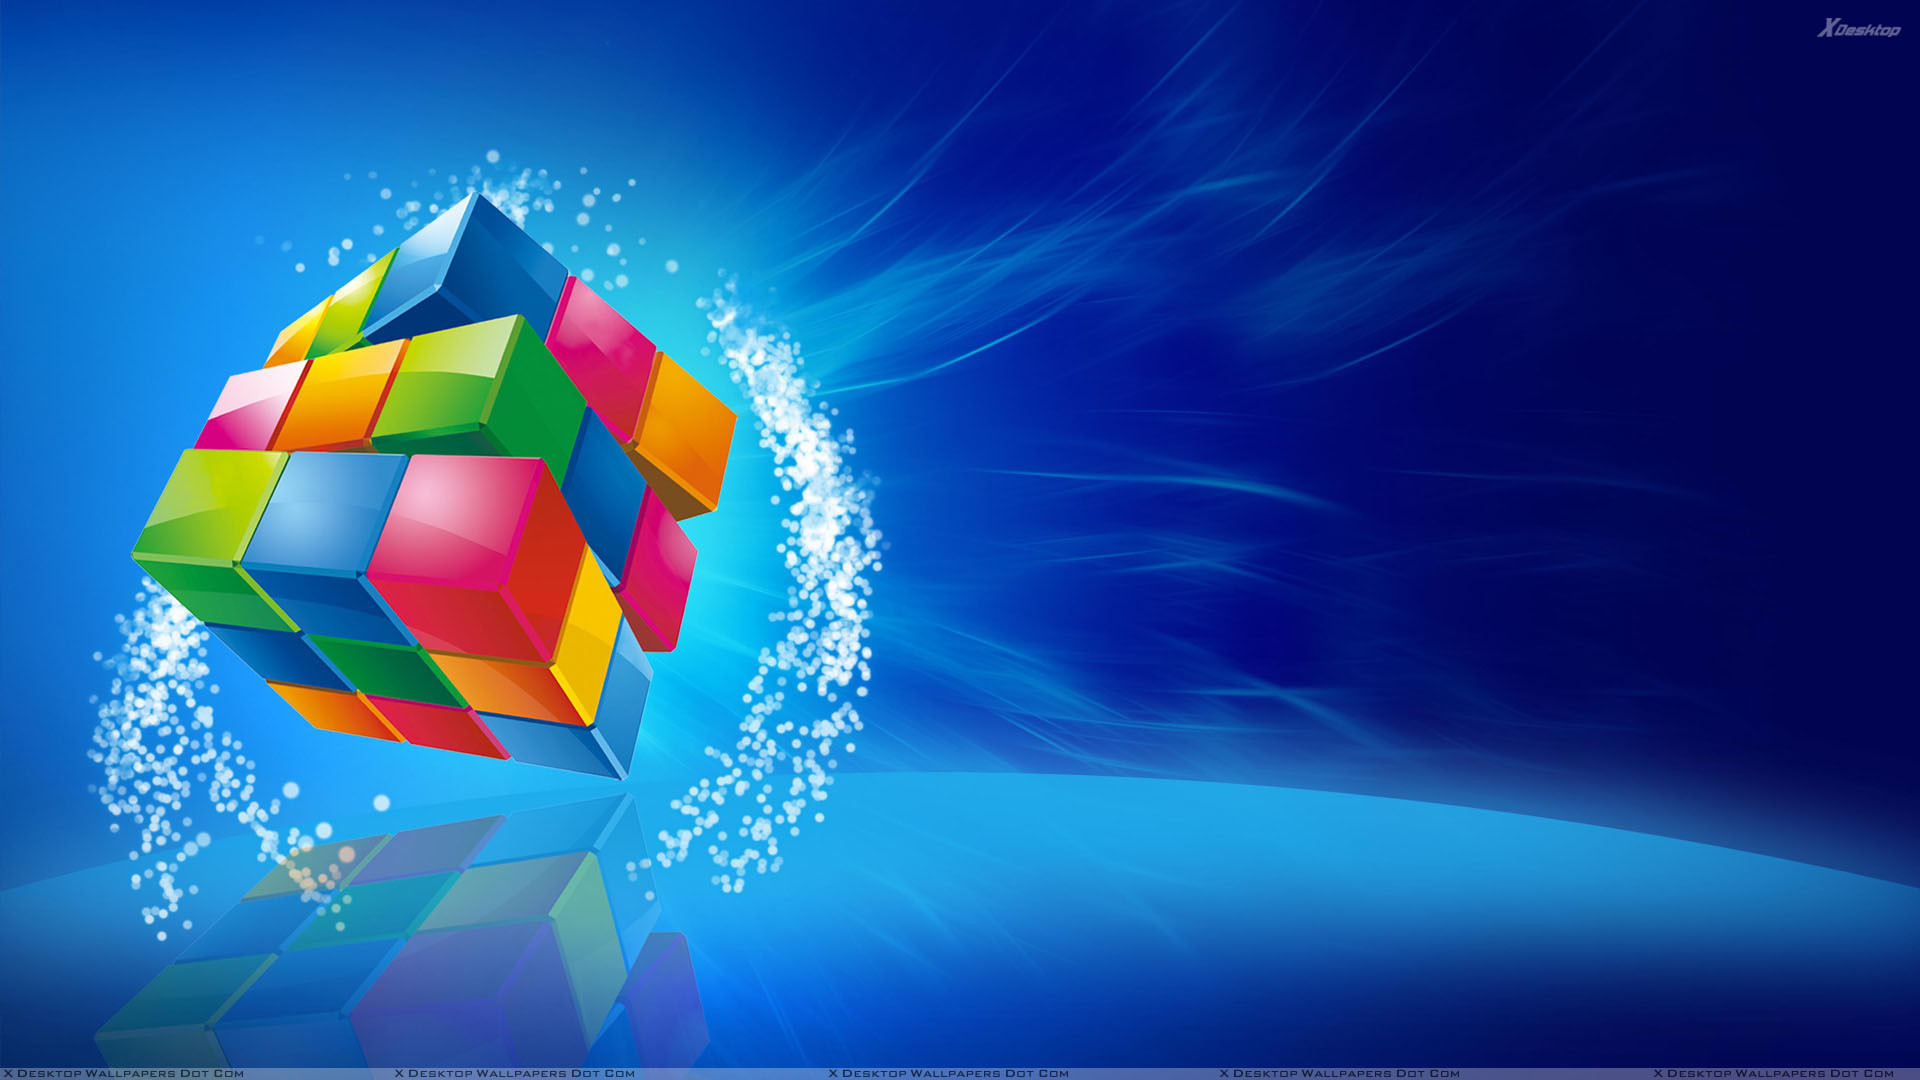 1920x1080 You are viewing wallpaper titled "Color Cube On Blue Background" ...